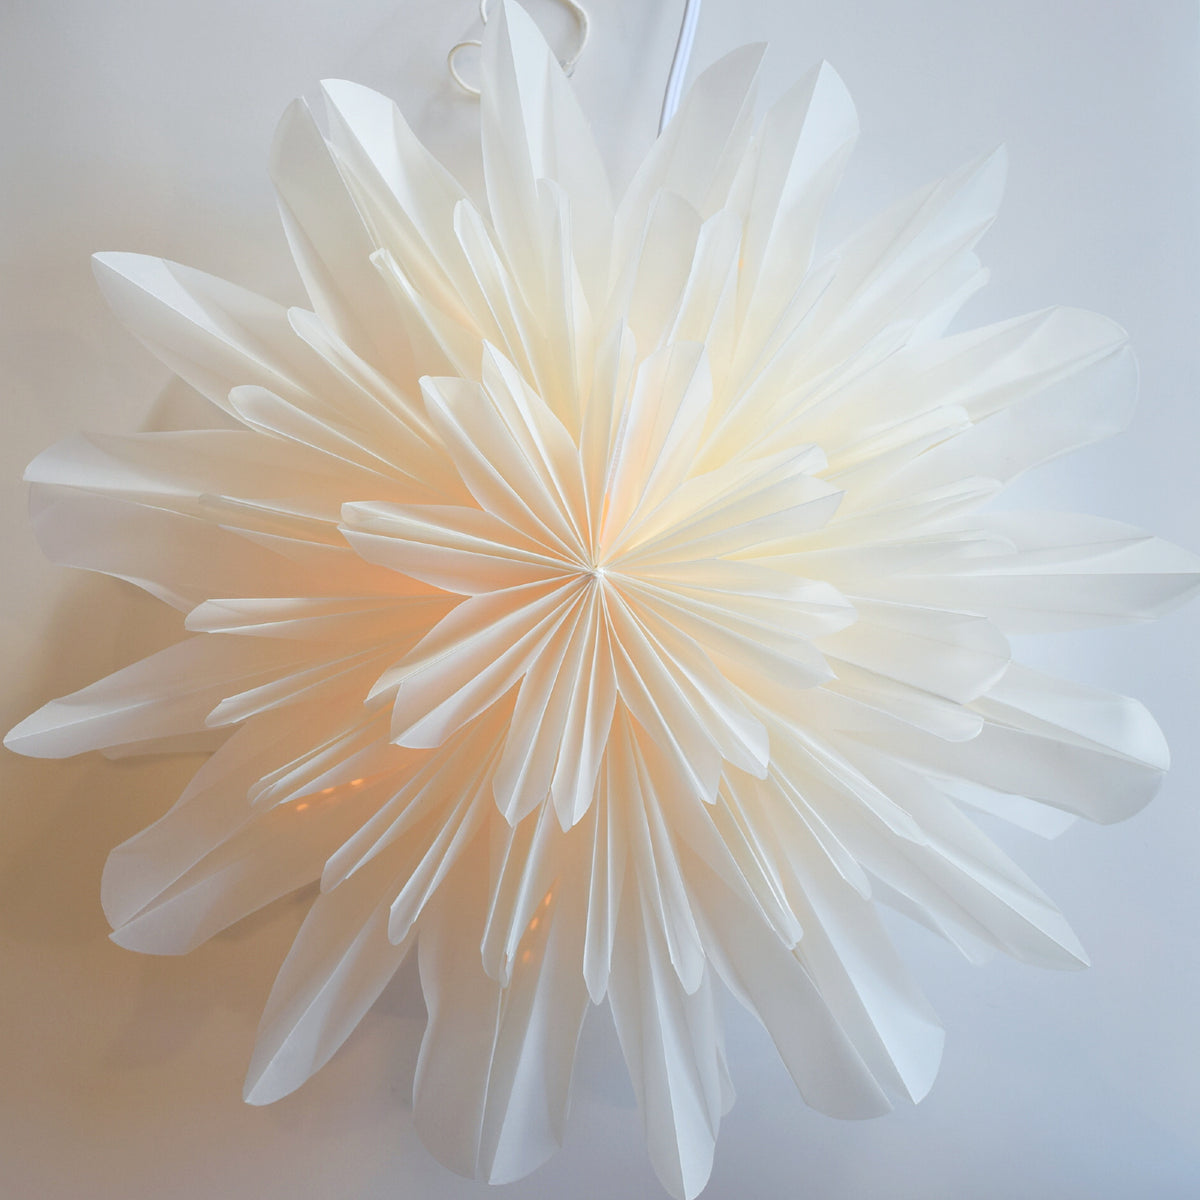 White Snowfall Snowflake Star Lantern Pizzelle Design - Great With or Without Lights - Ideal for Holiday and Snowflake Decorations, Weddings, Parties, and Home Decor